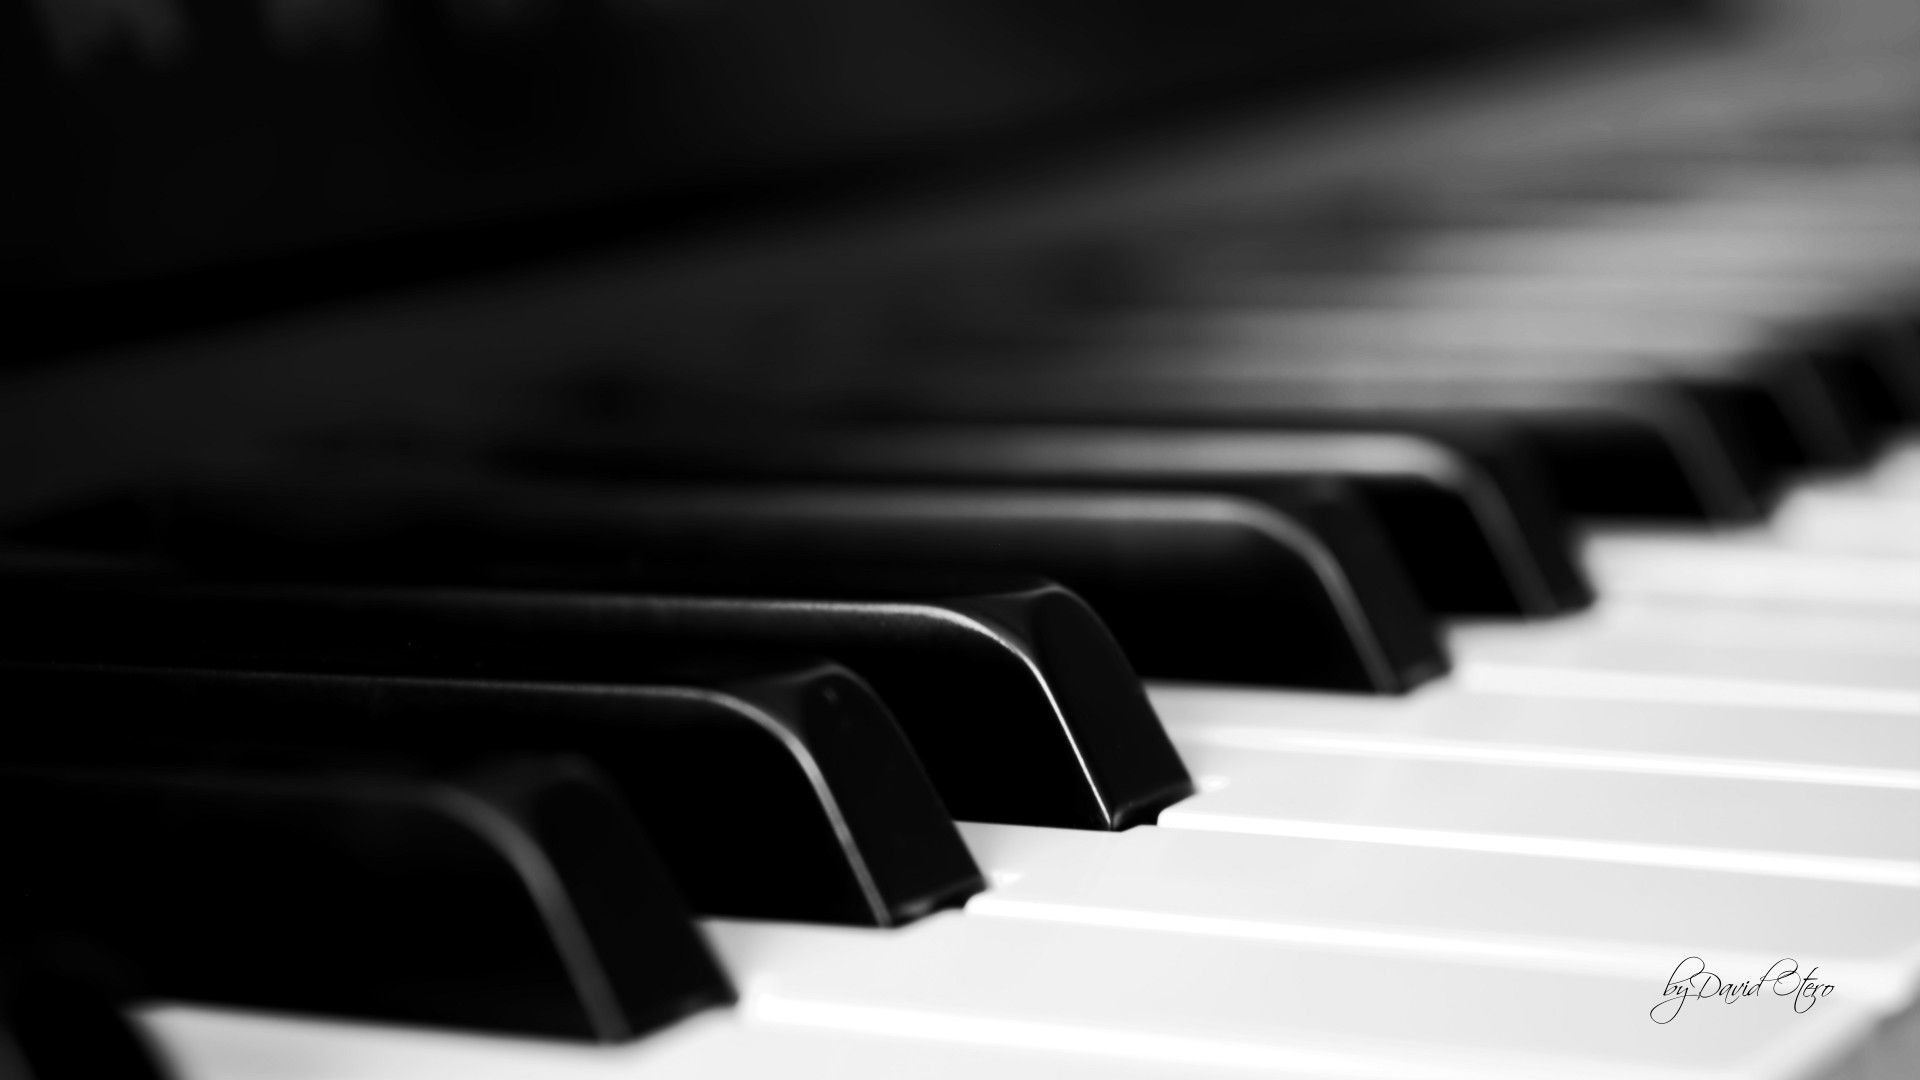 1920x1080 Top Piano Desktop Backgrounds Animation Images for Pinterest